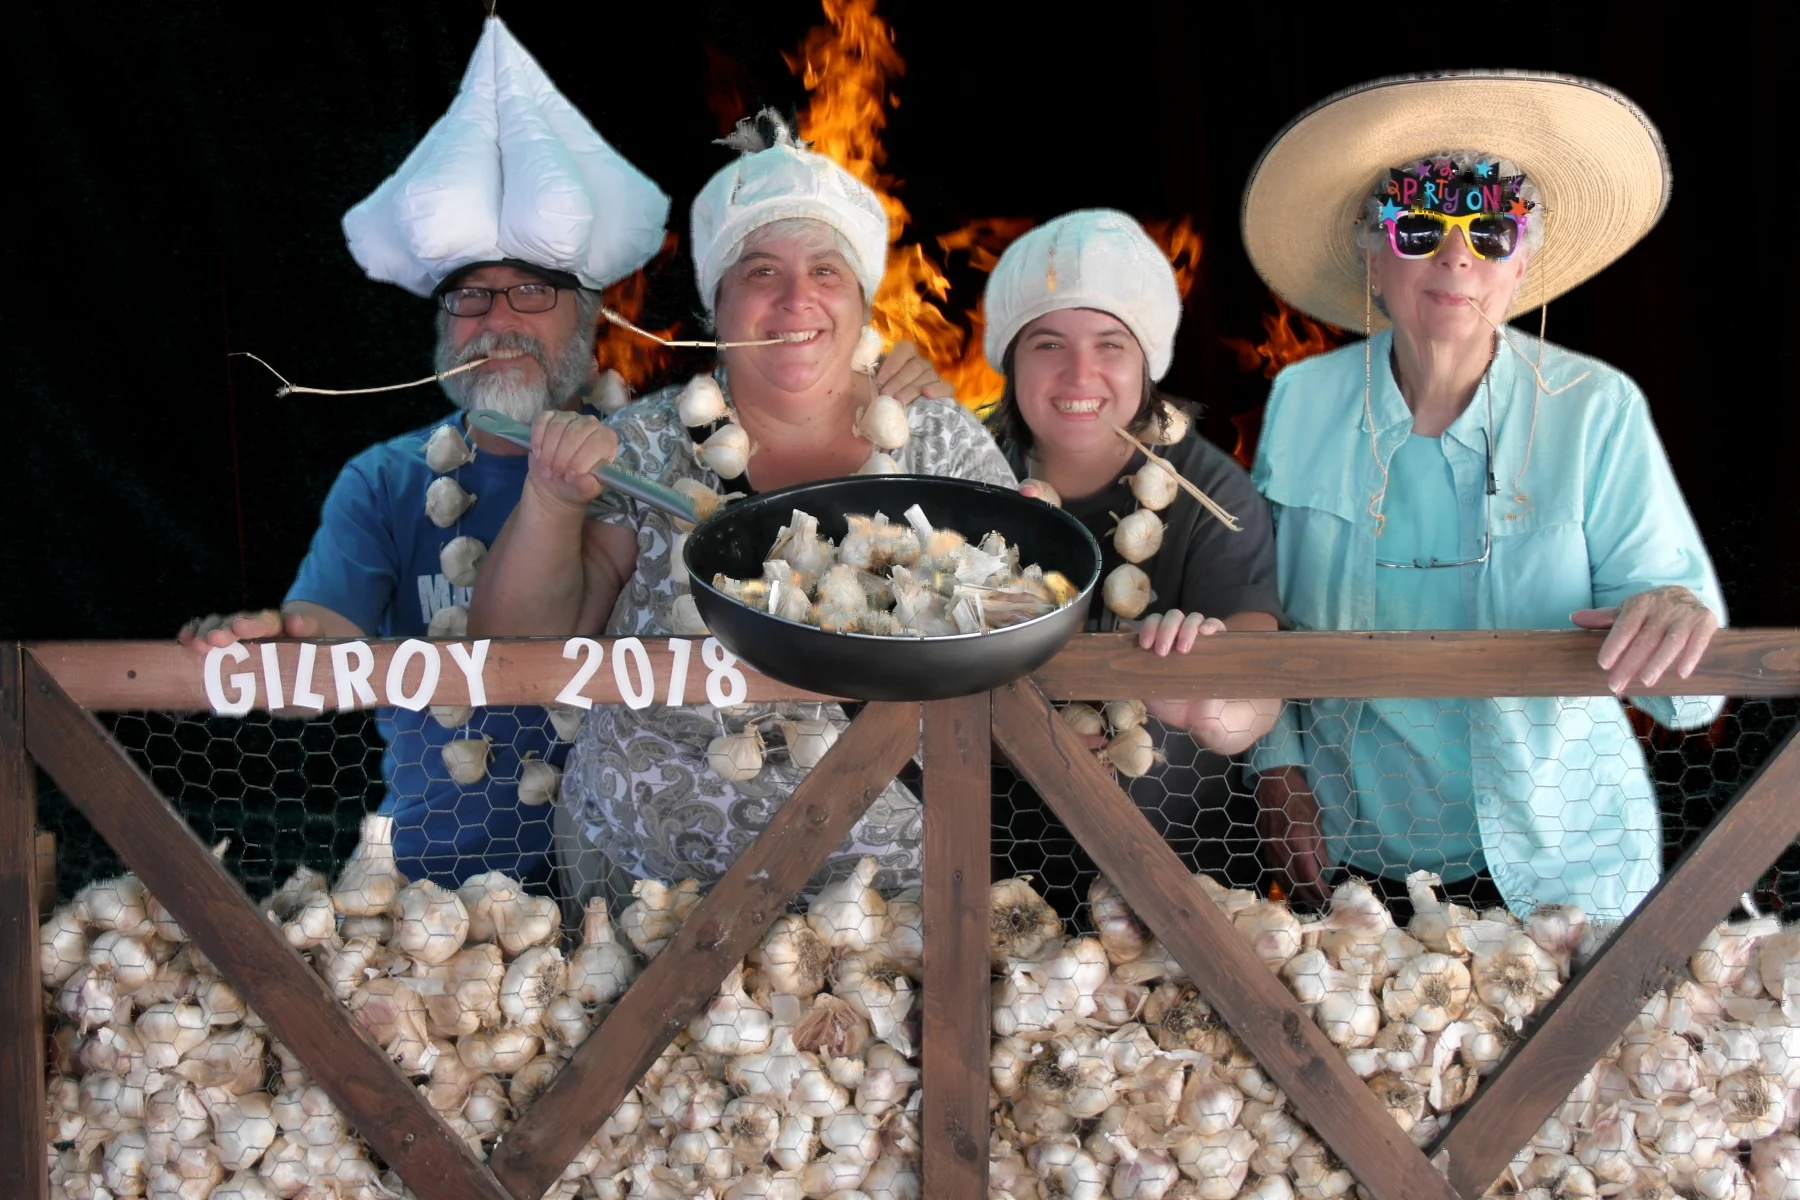 4 people with garlic hats.